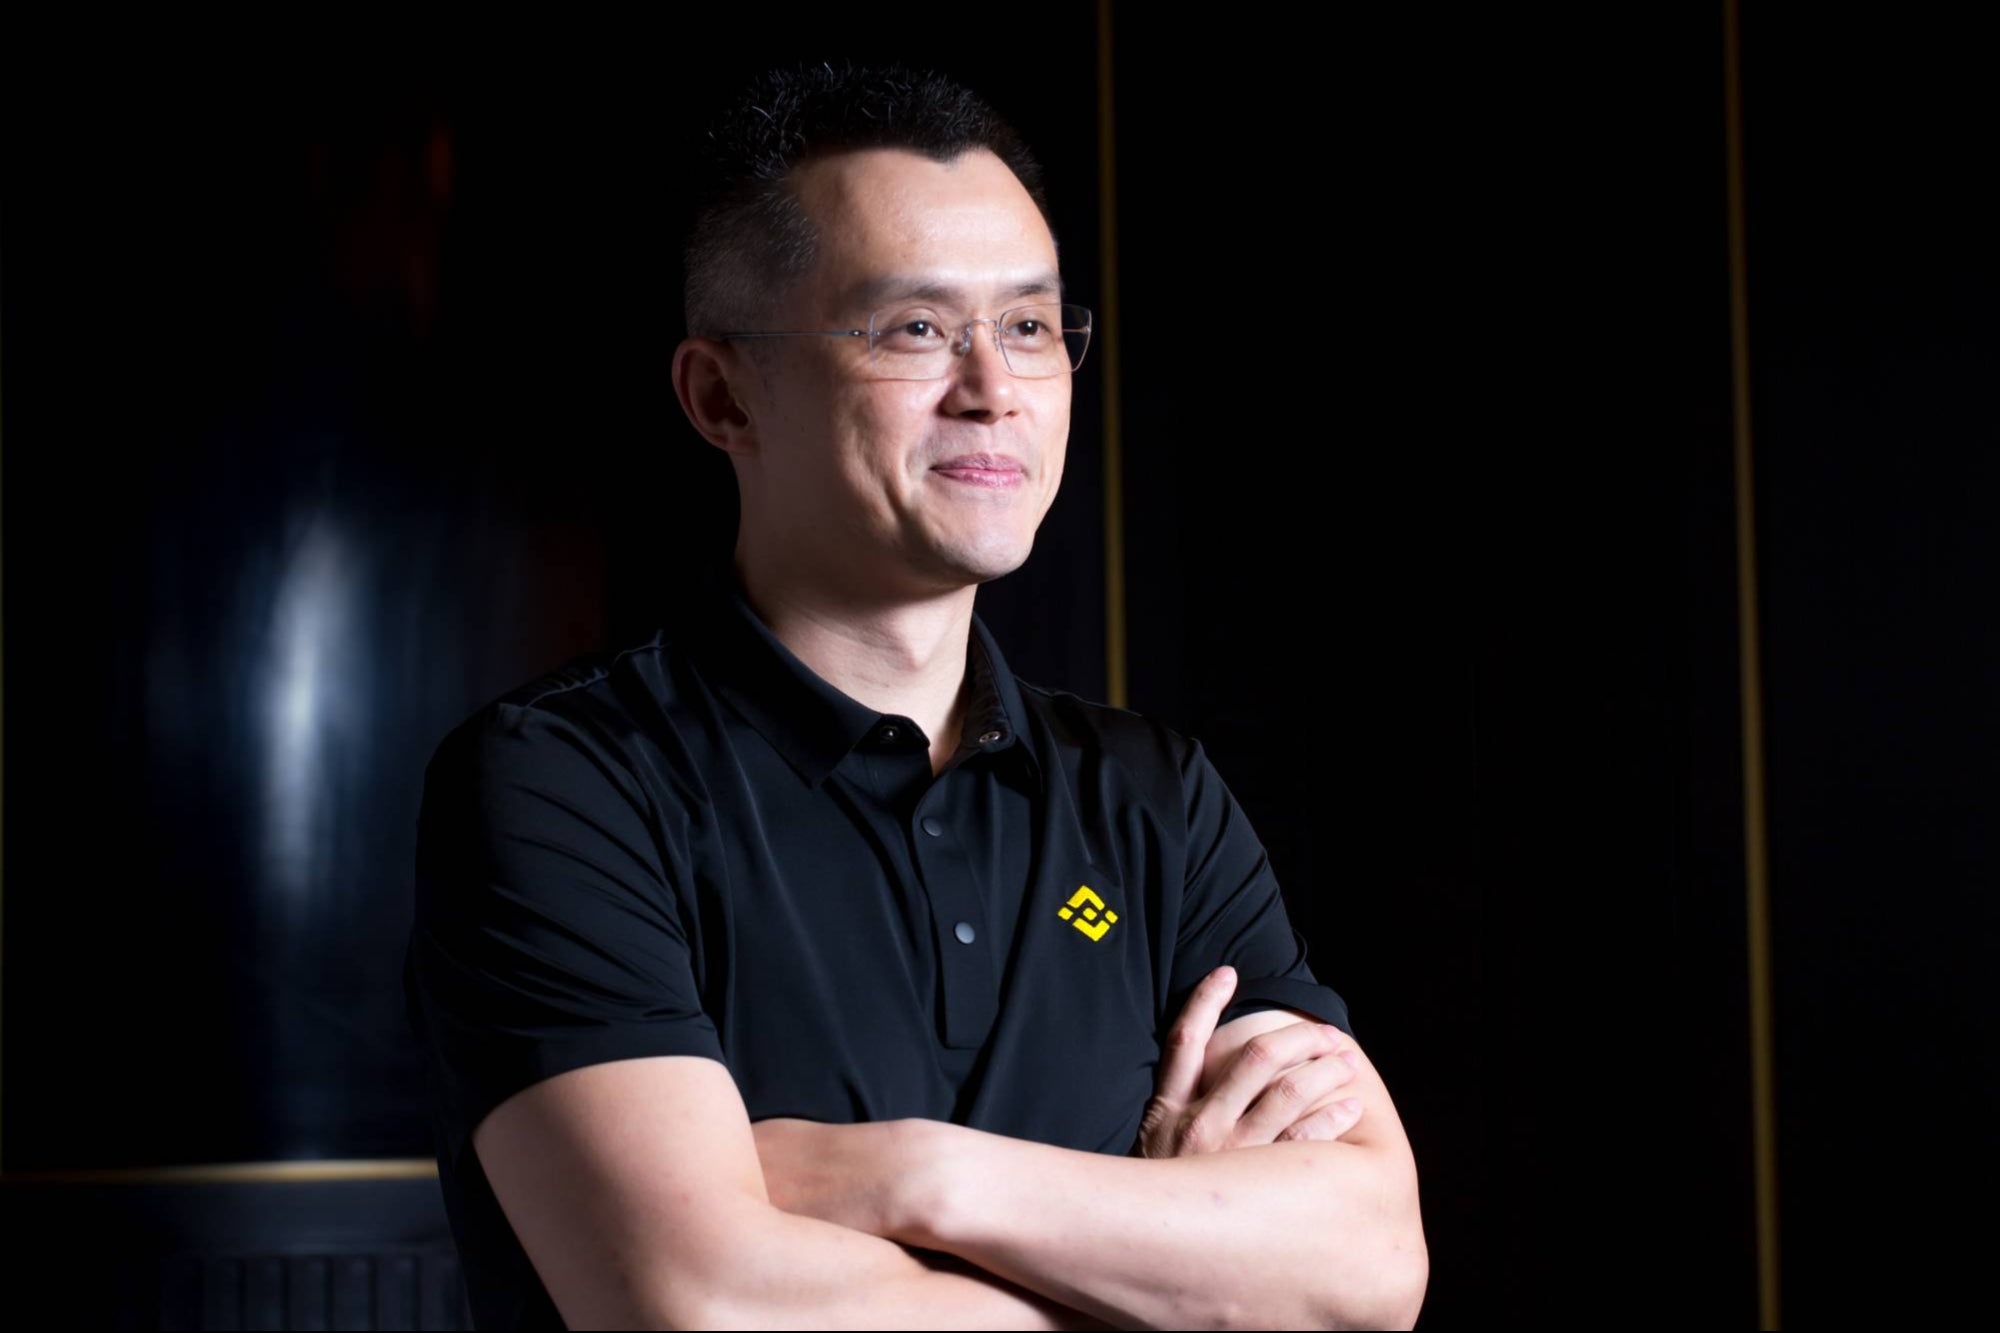 Changpeng Zhao, founder and chief executive officer of Binance